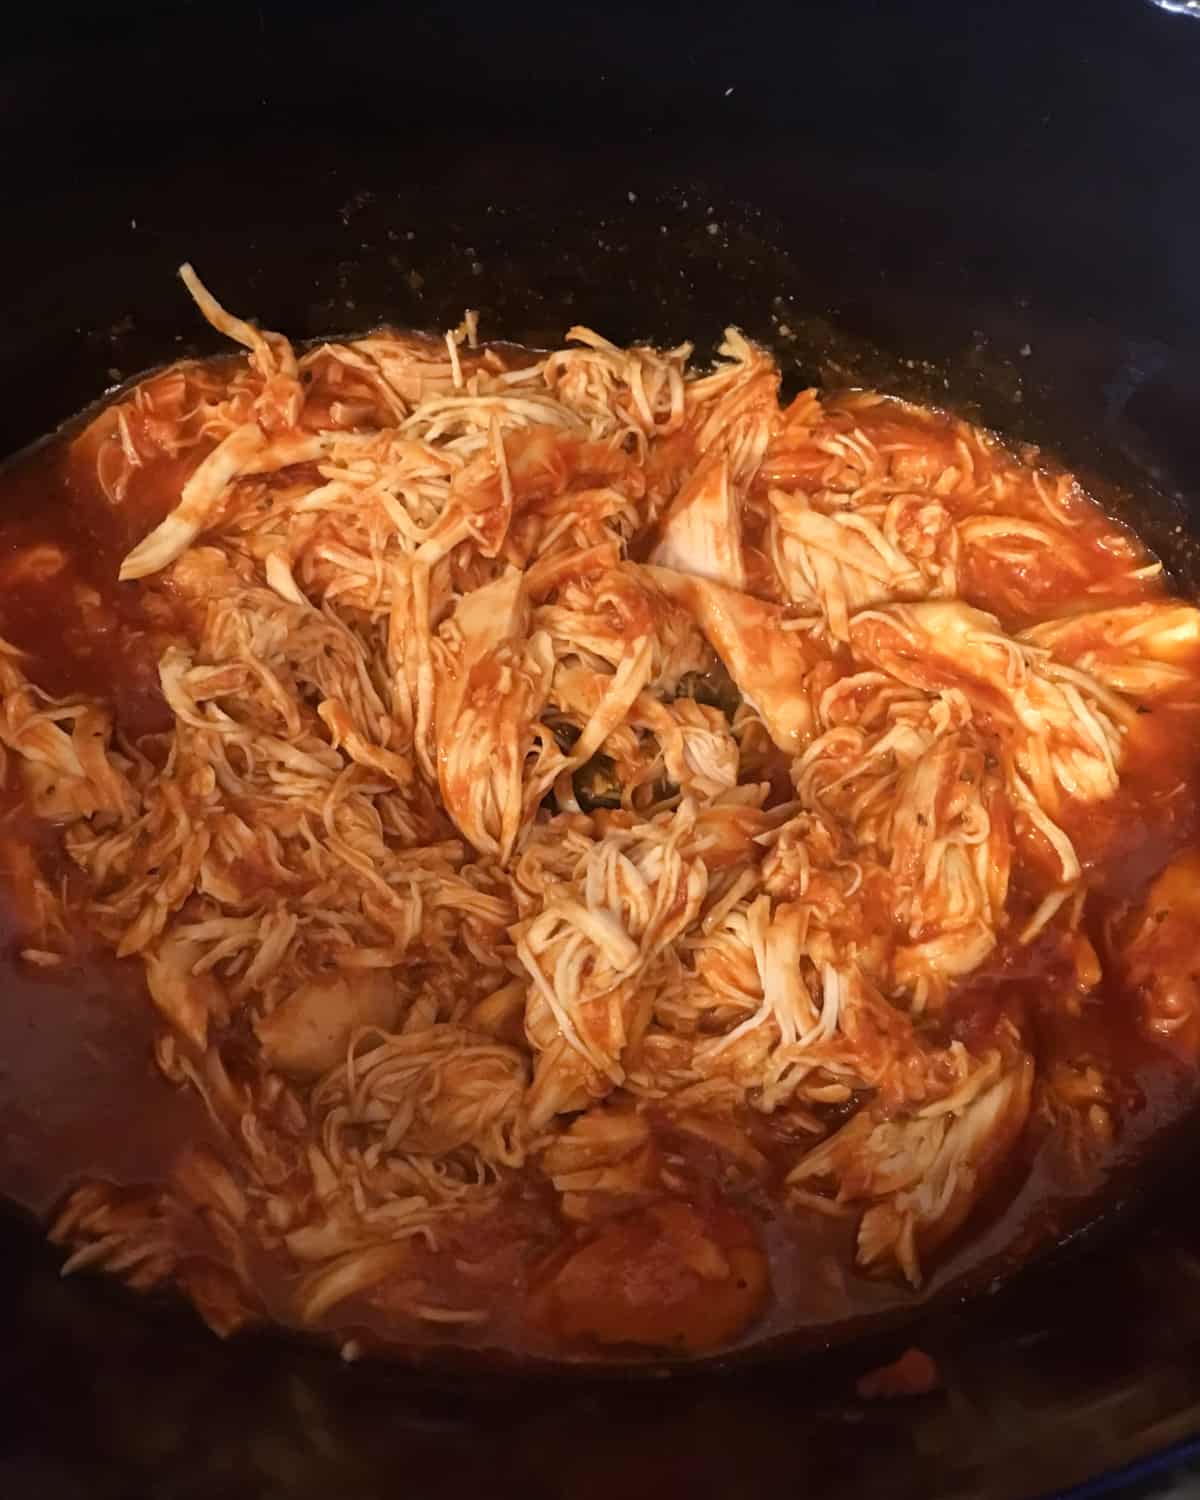 Shredded chicken breast mixed with tomato sauce.